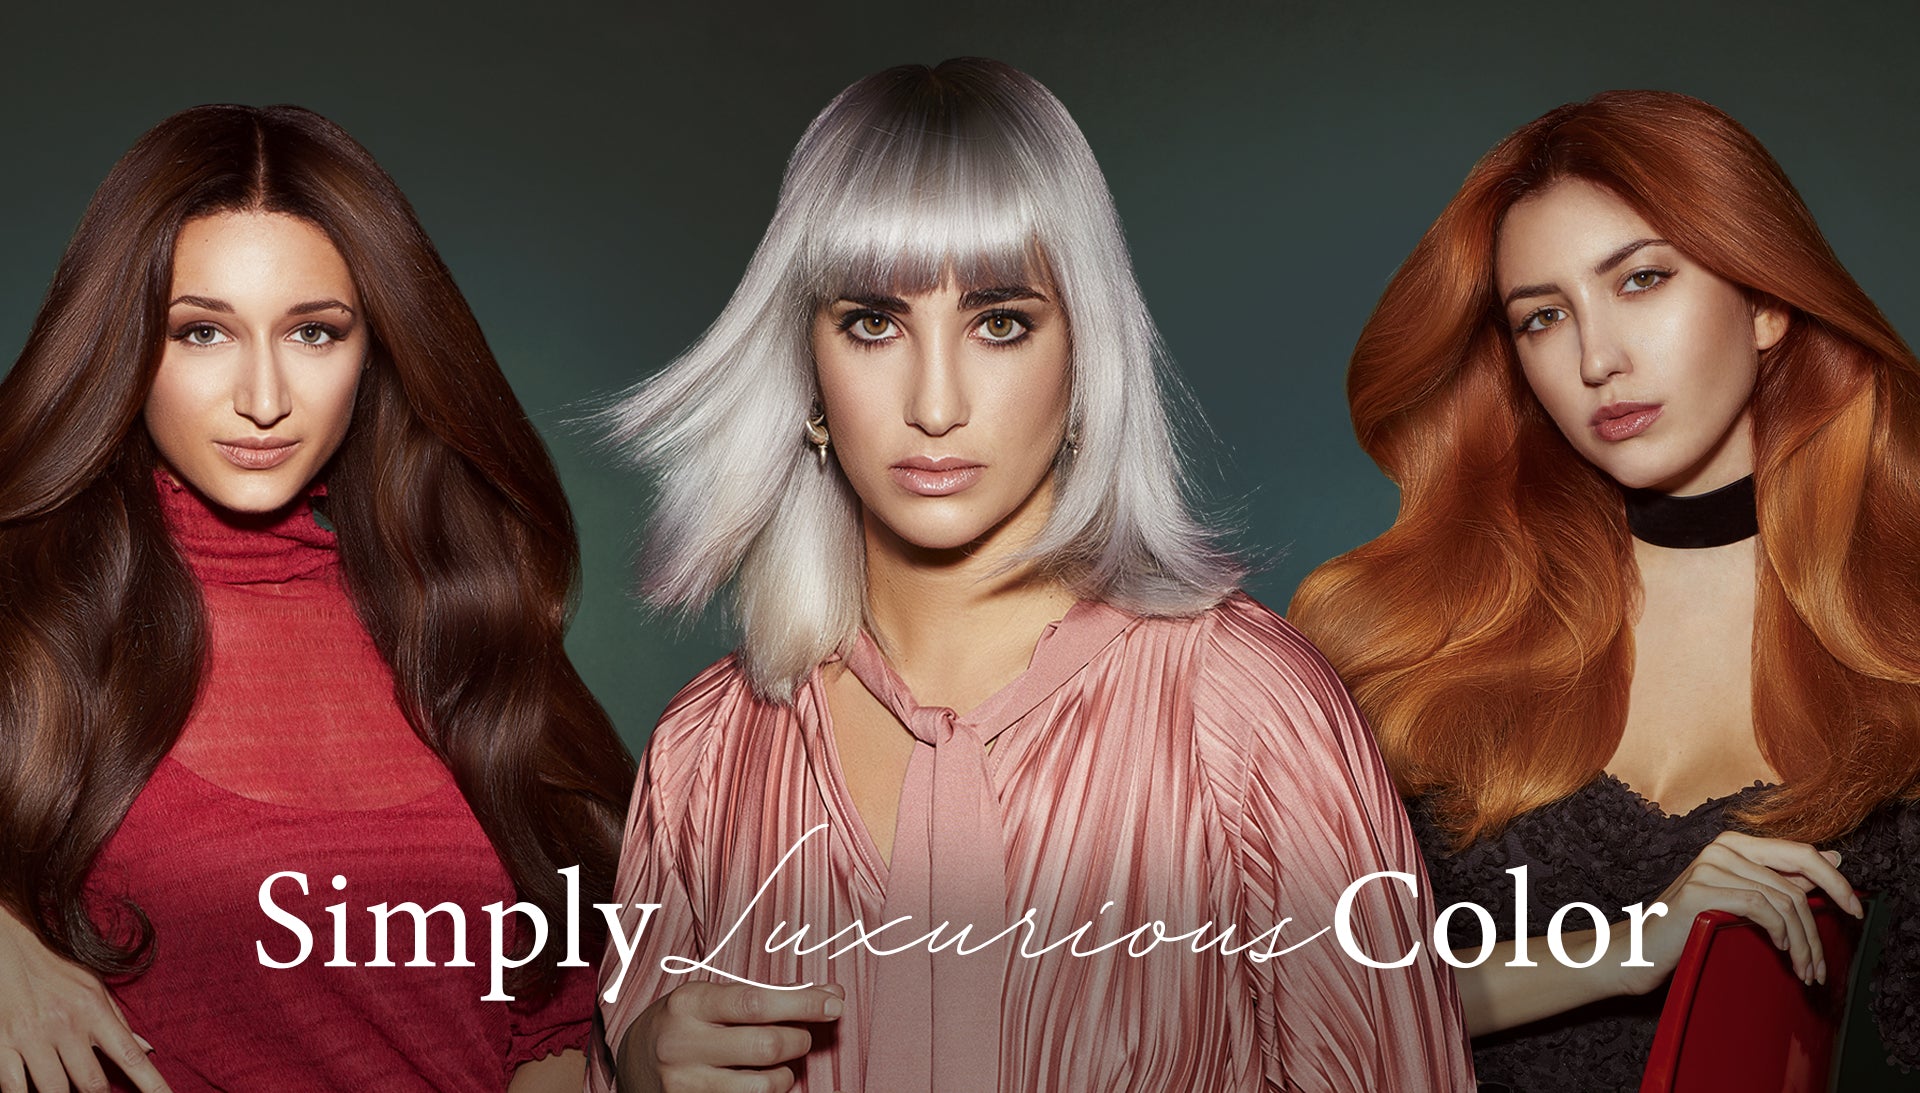 50 Best Hair Colors and Hair Color Trends for 2023 - Hair Adviser